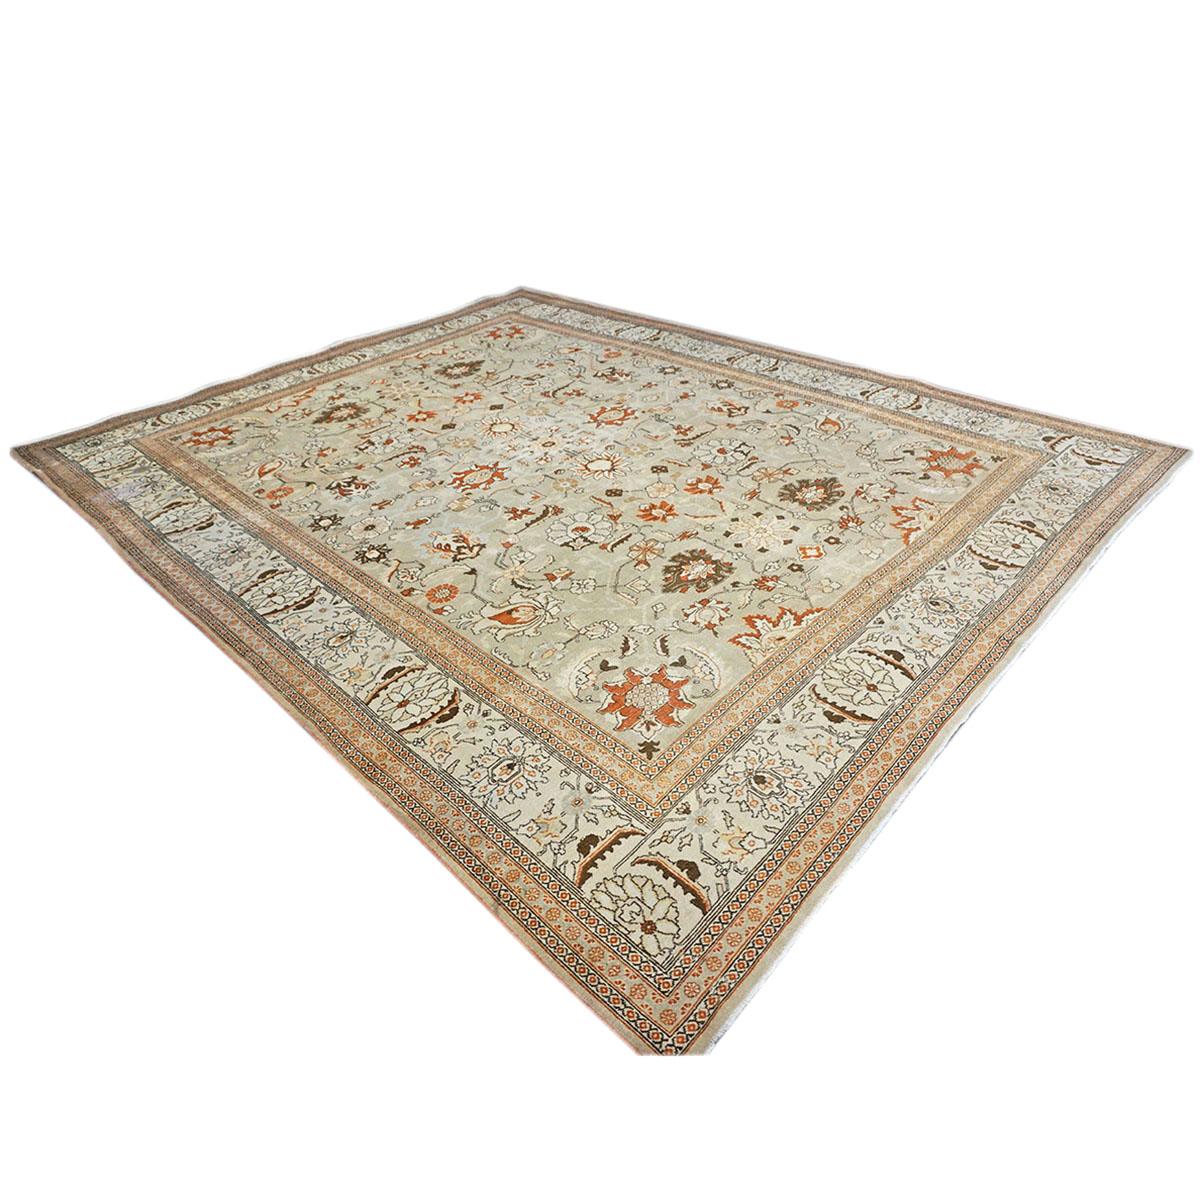 Ashly fine rugs presents a 1910s Antique Persian Tabriz. Tabriz is a northern city in modern-day Iran and has forever been famous for the fineness and craftsmanship of its handmade rugs. This piece has a light tan-colored background, with the